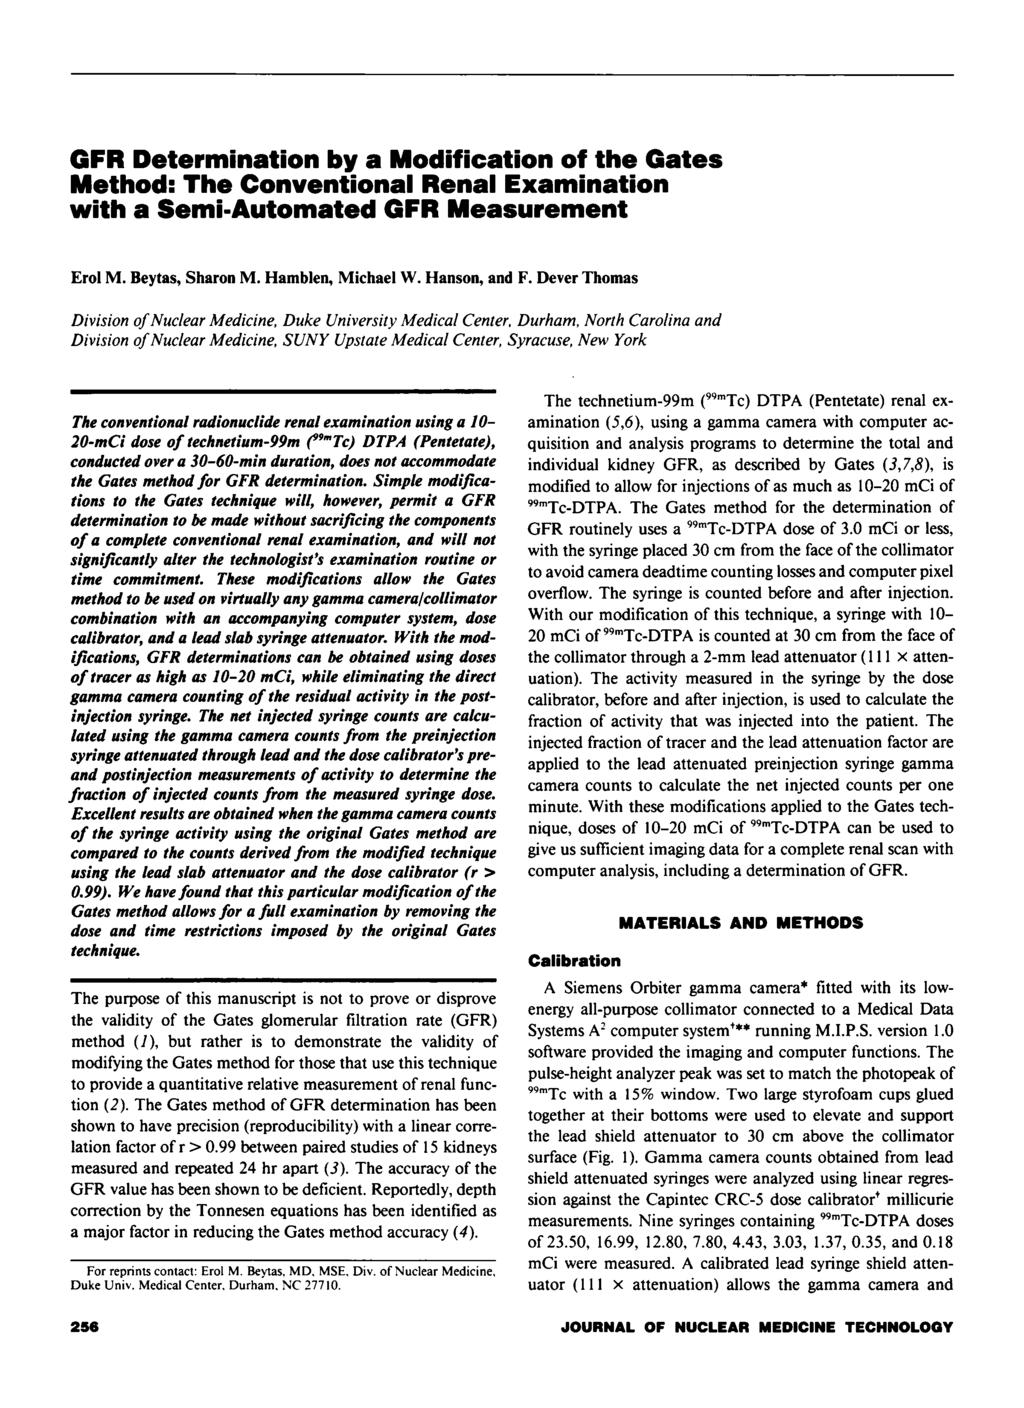 GFR Determination by a Modification of the Gates Method: The Conventional Renal Examination with a Semi-Automated GFR Measurement Erol M. Beytas, Sharon M. Hamblen, Michael W. Hanson, and F.